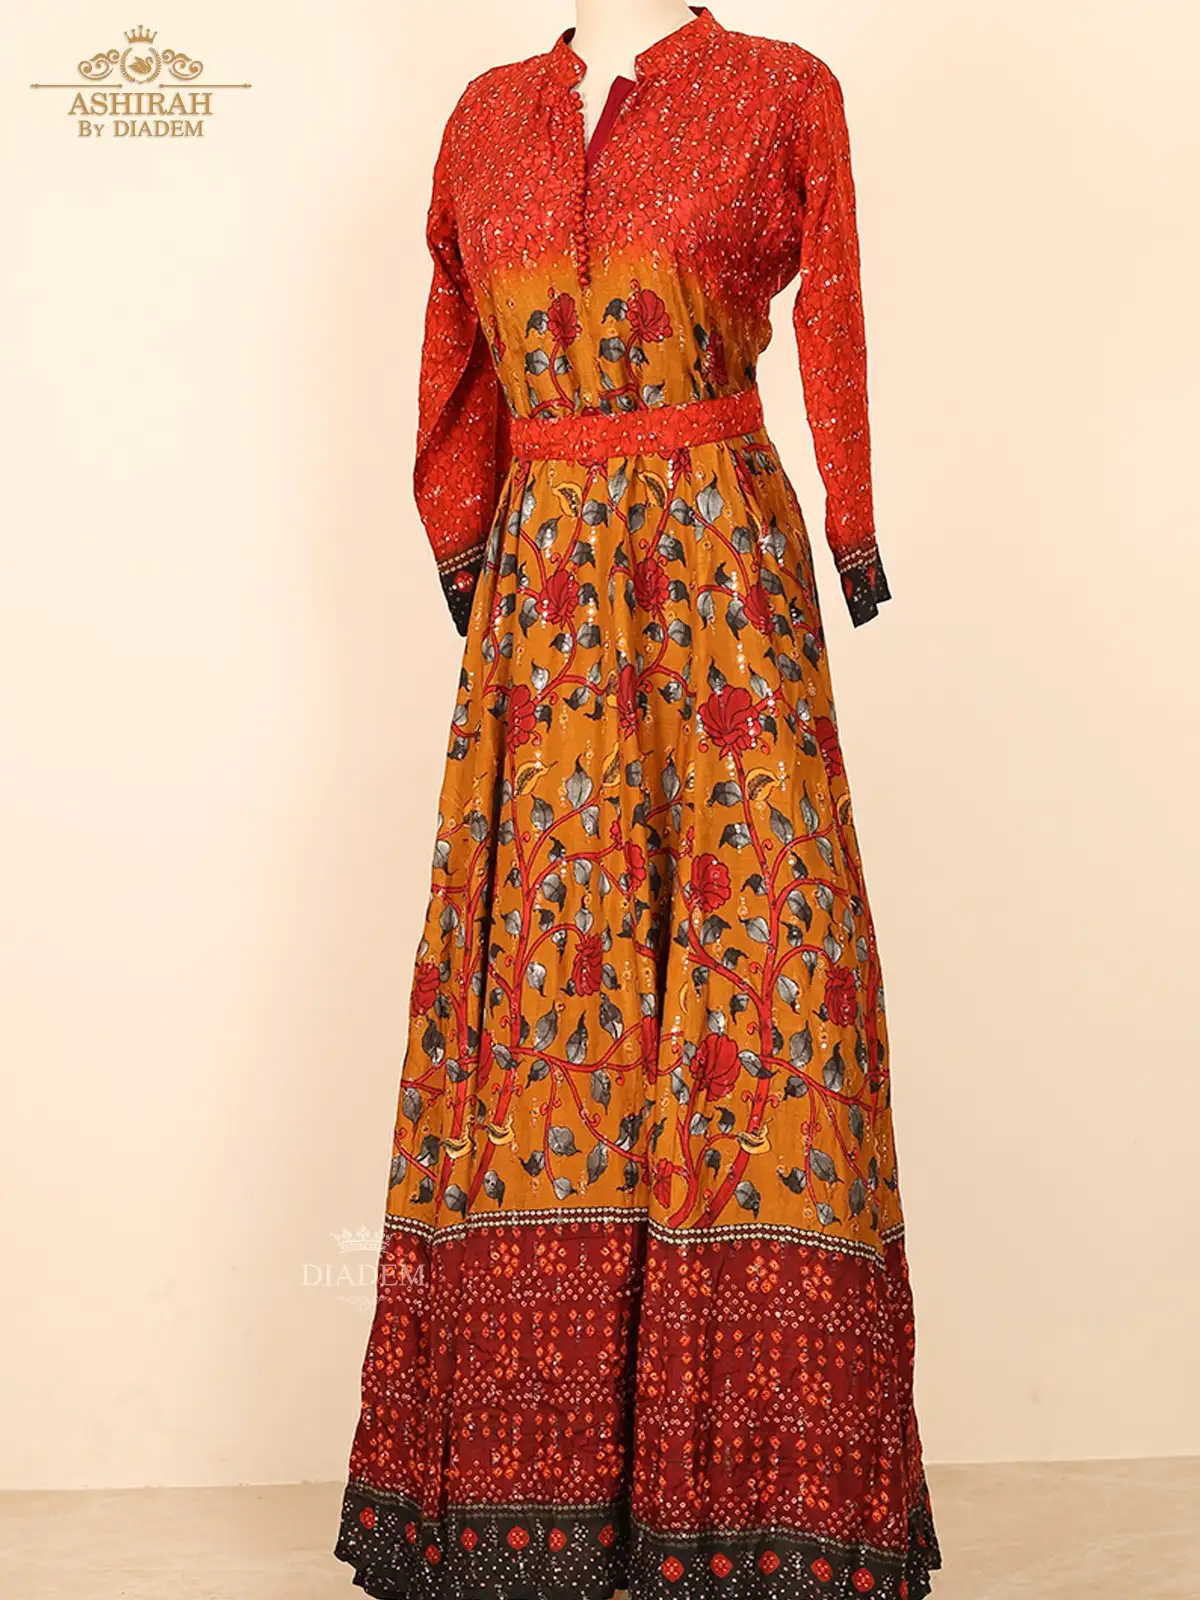 Red Orange Ombre Printed Long Kurti Enhanced In Floral Prints And Waist Belt